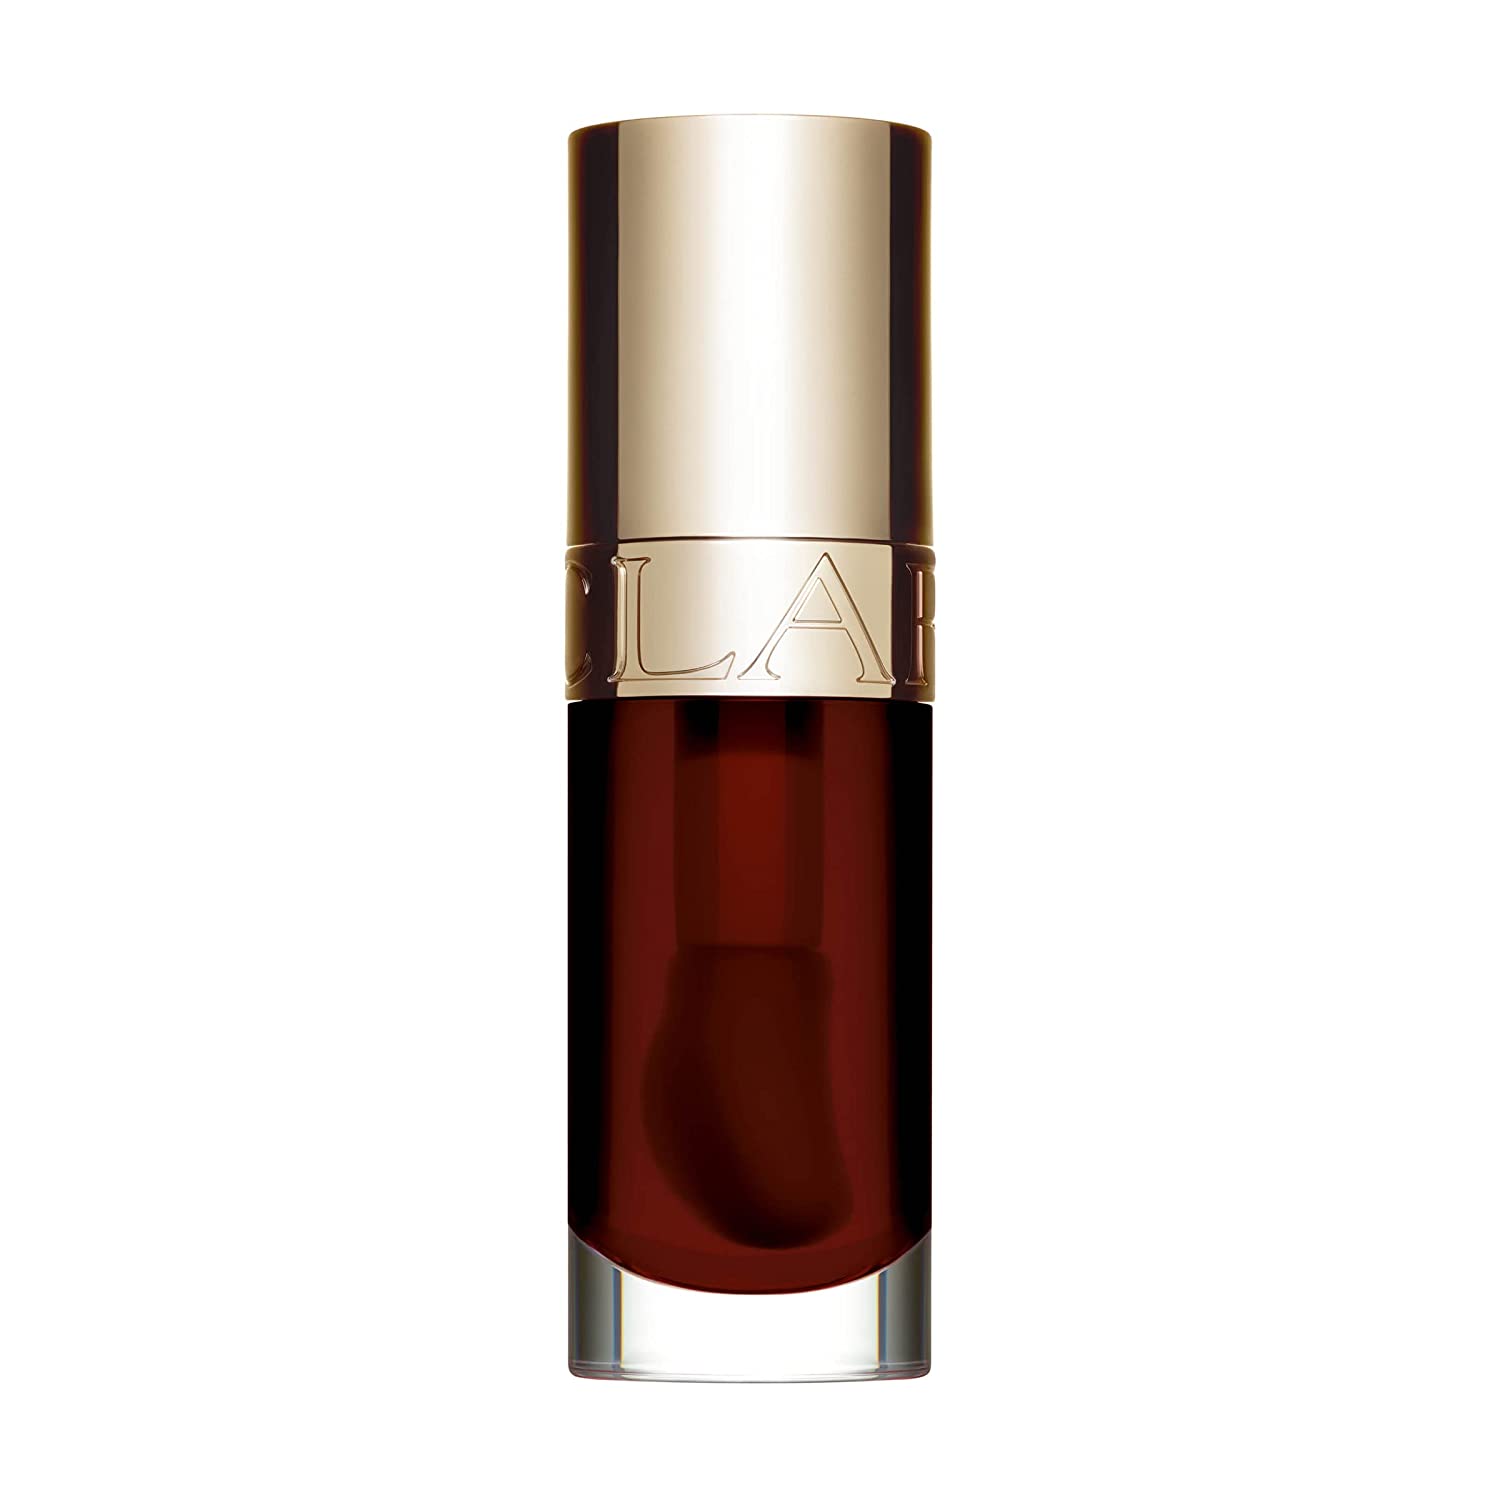 Clarins Lip Comfort Oil | Soothes, Soothes, Moisturises and Protects The Lips | Translucent, High Gloss Finish | Visible clumsy | 93% Natural Ingredients | Organic Sweetbriar Rose Oil, Rich in Omega-6 and Omega-3